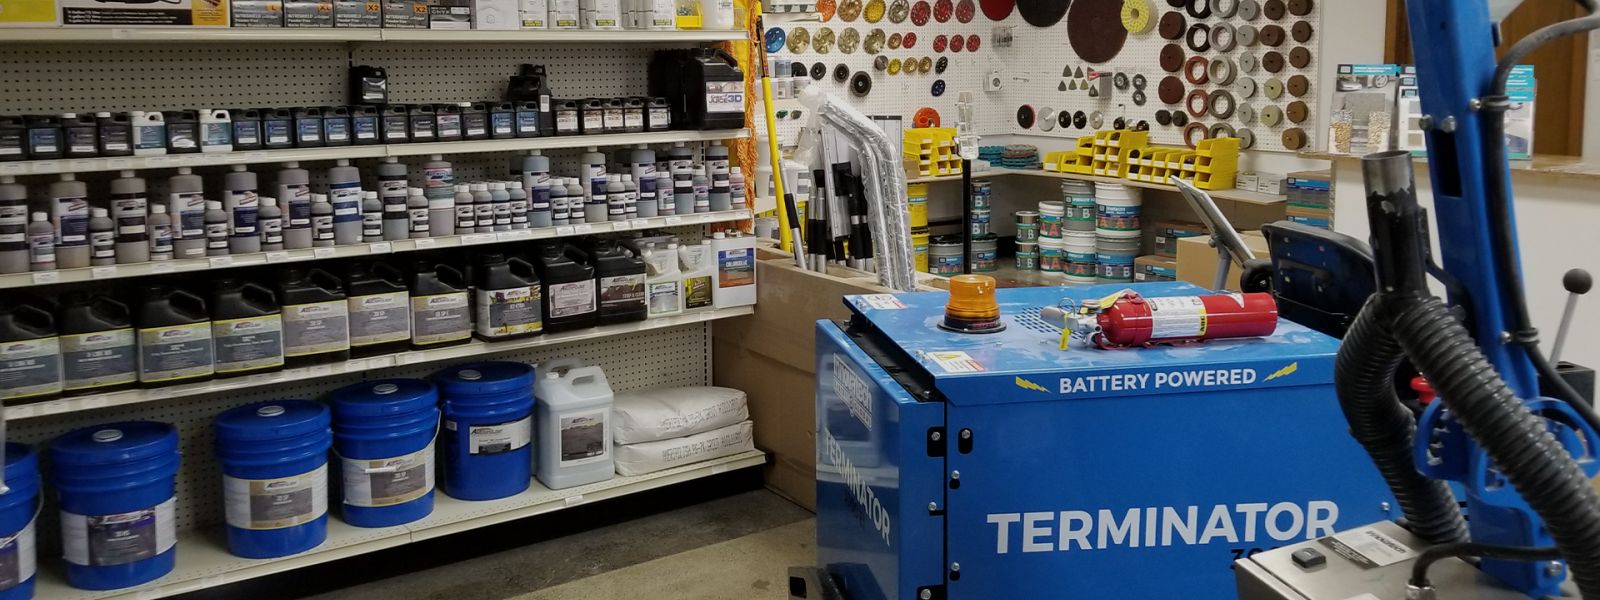 Products arranged on shelves inside Surface Prep SuperStore Washington